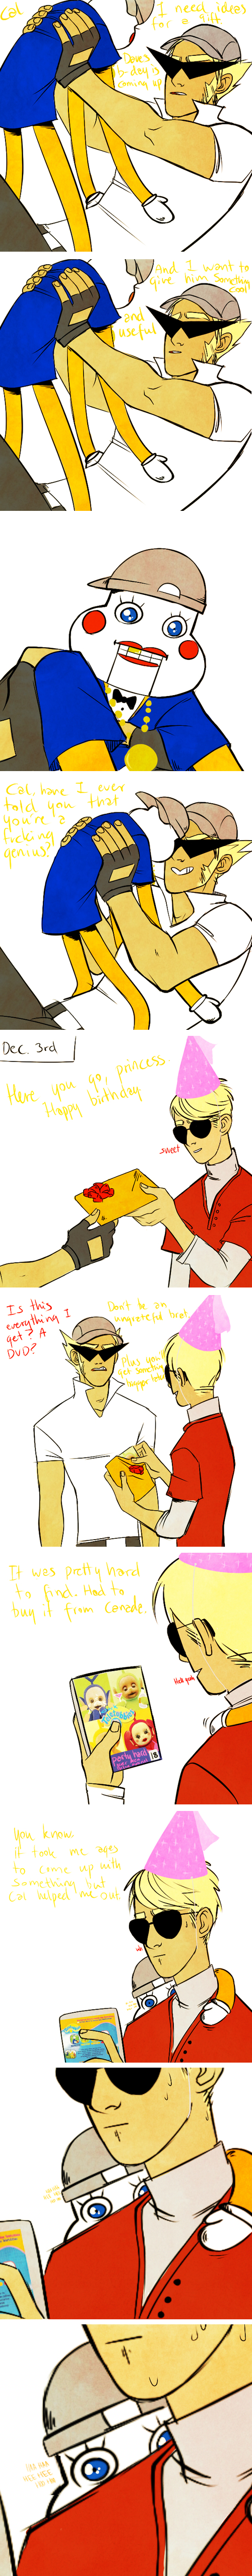 bro comic crossover dave_strider lil_cal teletubbies thelucky21